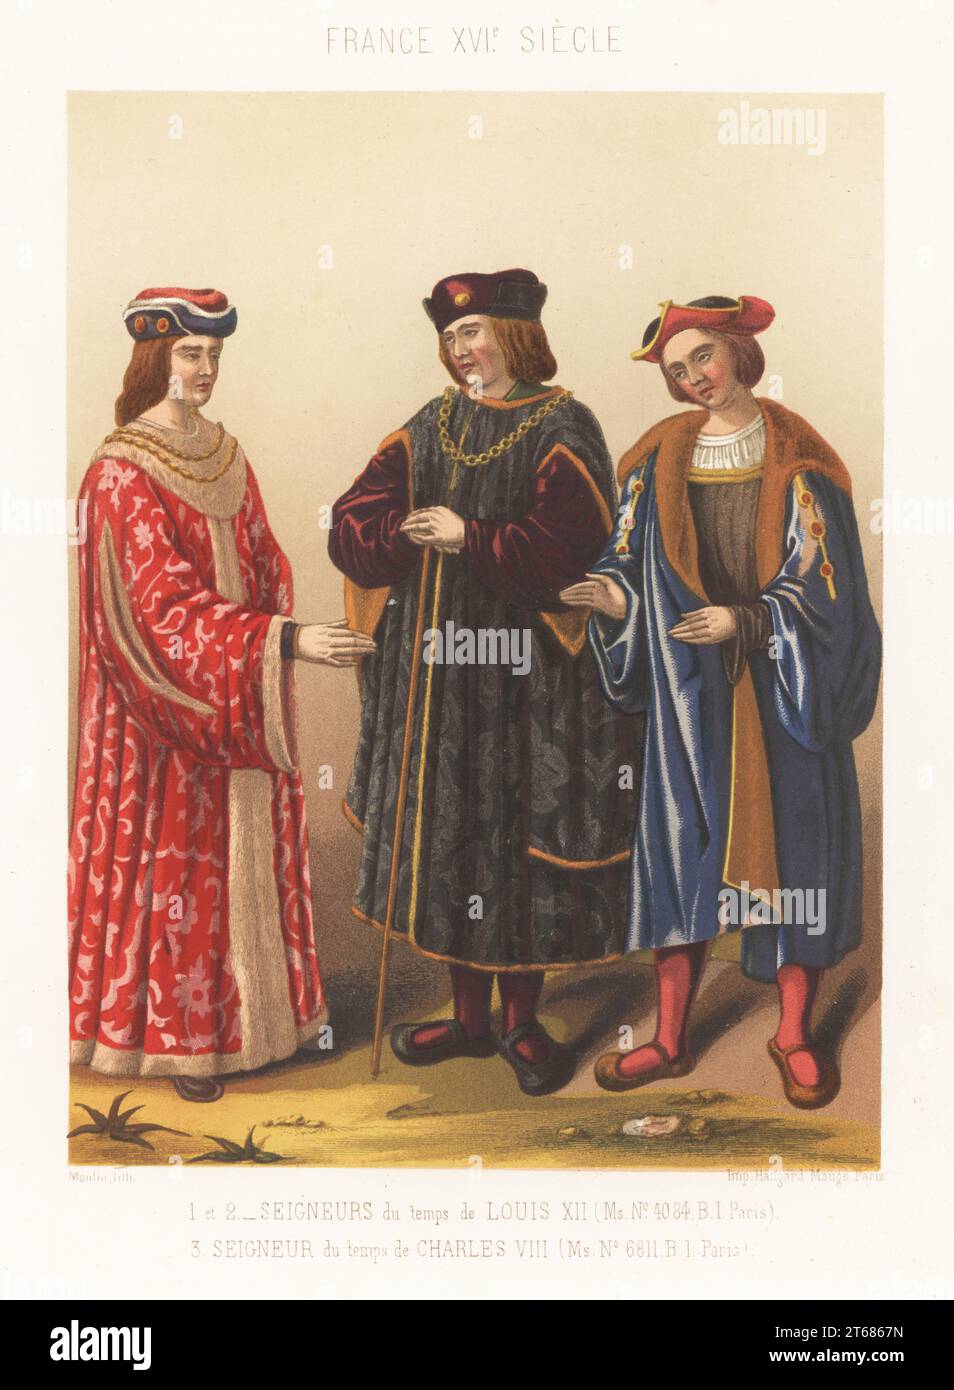 Costume of aristocrats in the era of Louis XII 1,2, and Charles VIII 3. They wear long fur-lined coats and flat caps. Seigneurs du temps de Louis XII, et du temps de Charles VIII. Taken from MS 4984 and MS 6811, Bibliotheque Imperiale de Paris. Chromolithograph by Moulin from Charles Louandres Les Arts Somptuaires, The Sumptuary Arts, Hangard-Mauge, Paris, 1858. Stock Photo